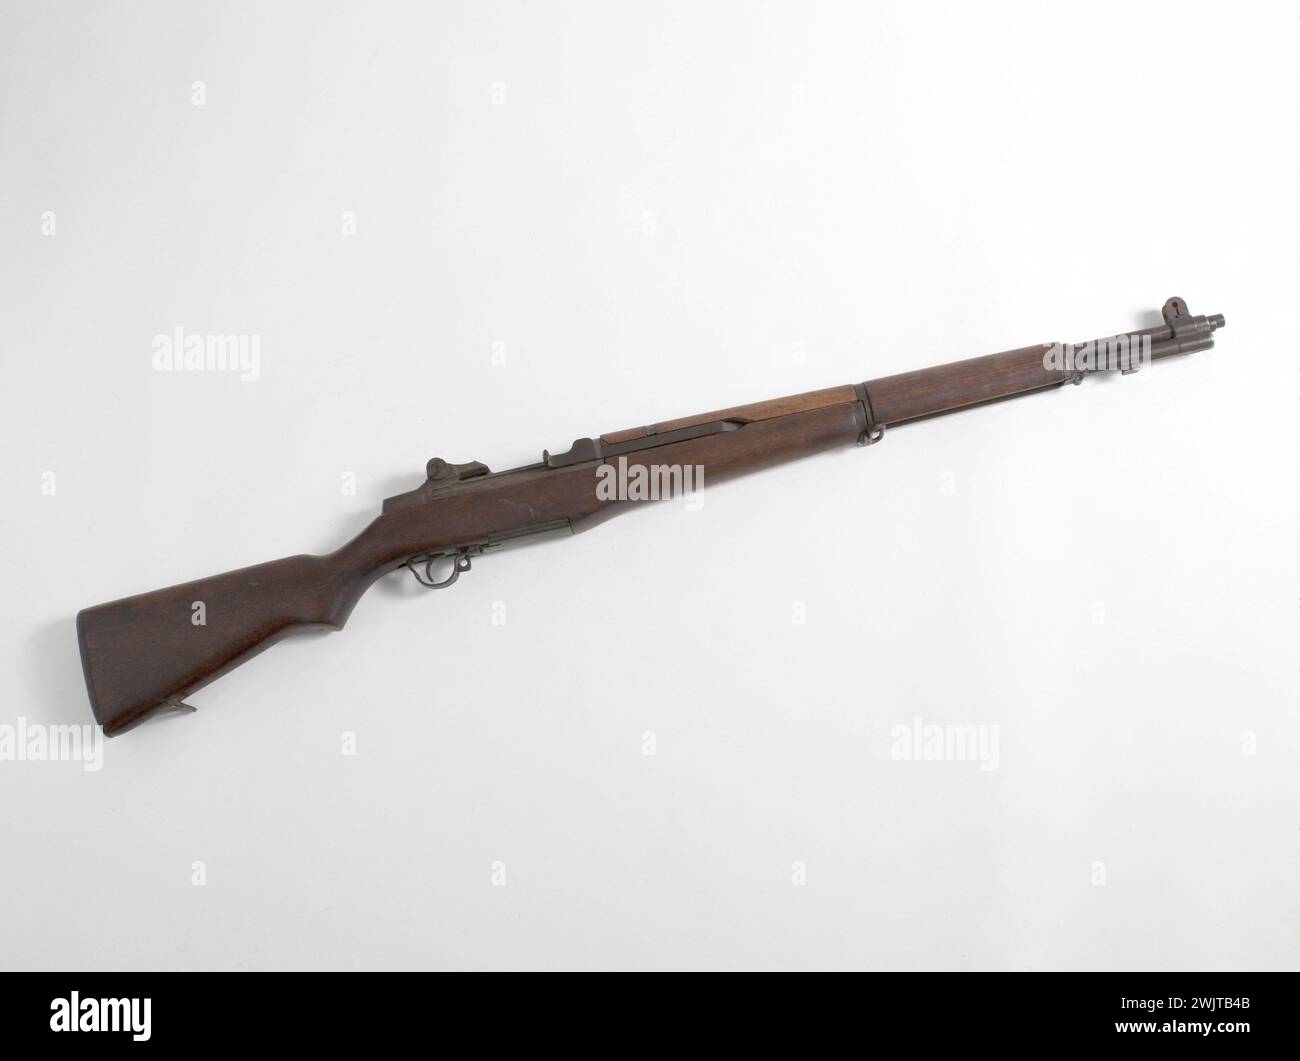 Armed. U.S. Rifle, cal .30, m1. Semi-automatic rifle Garand M1 Neutralized St Etienne, 1939-1945. General Leclerc Museum of Hauteclocque and the Liberation of Paris, Jean Moulin Museum. 78980-7 Firearm, American army, armament, weapon, military equipment, rifle, war 1939-1945, war 39-45, Second World War Stock Photo